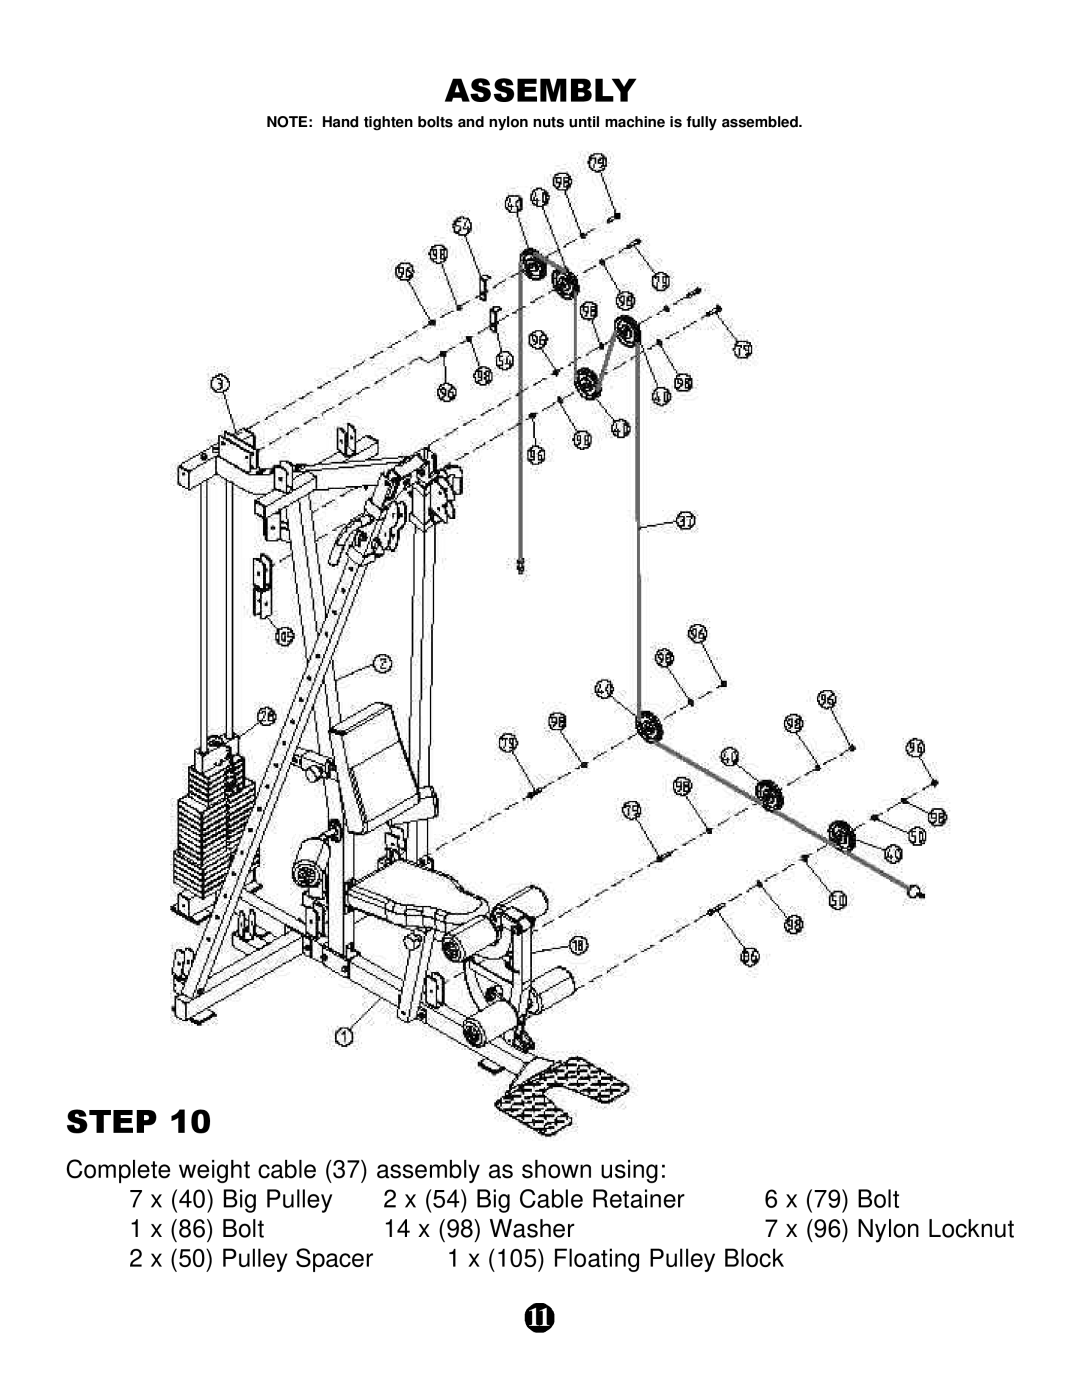 Keys Fitness KPS-CG owner manual Assembly, Step, Complete weight cable 37 assembly as shown using 